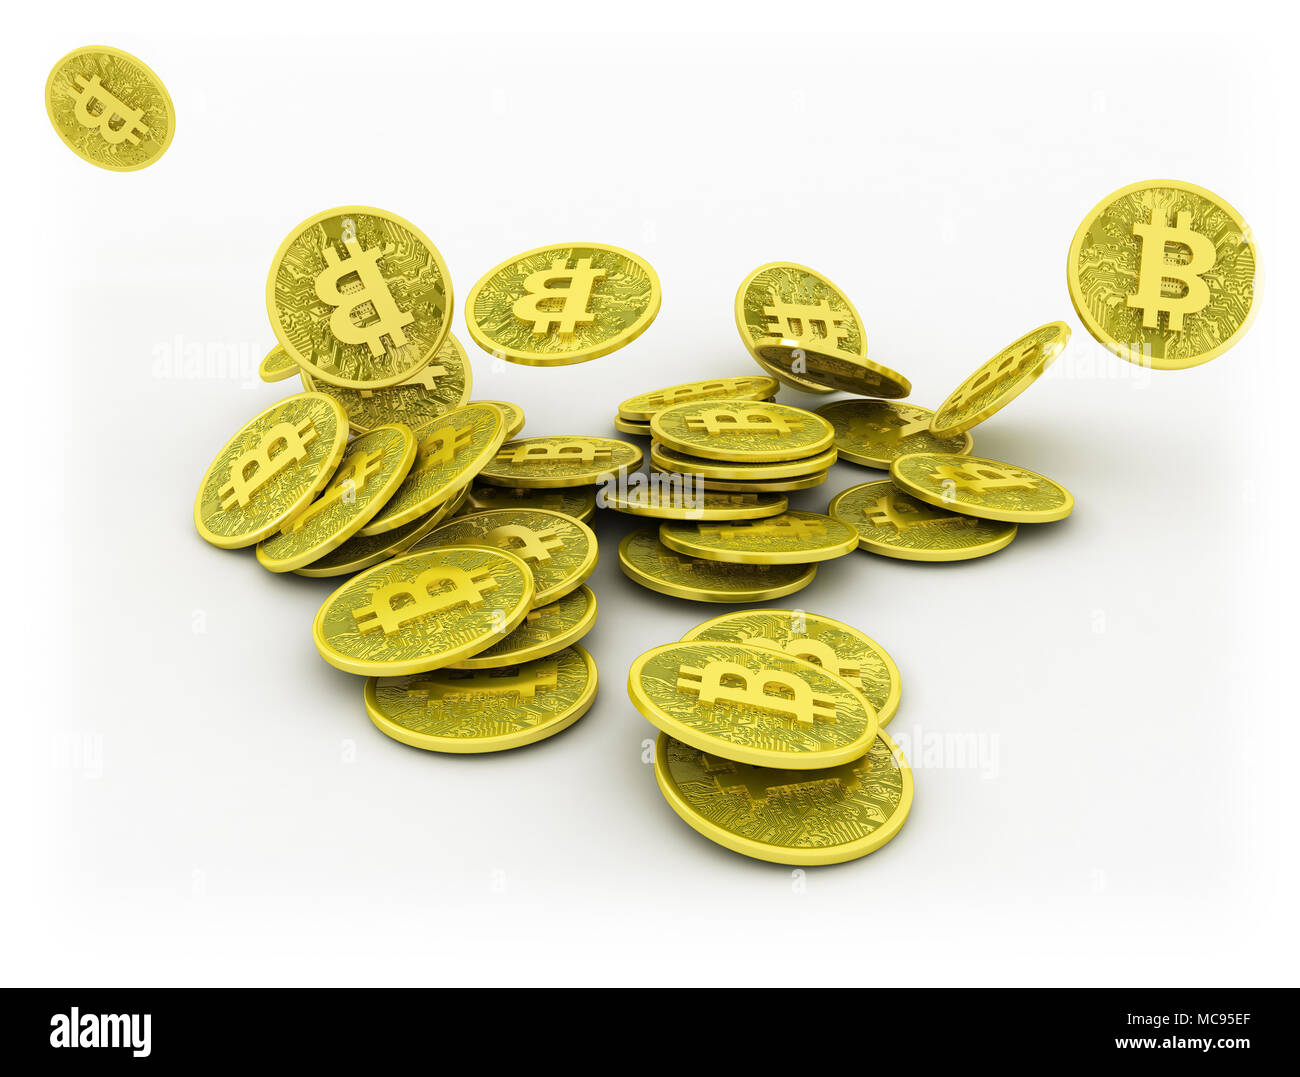 Falling bit coins on white background Stock Photo